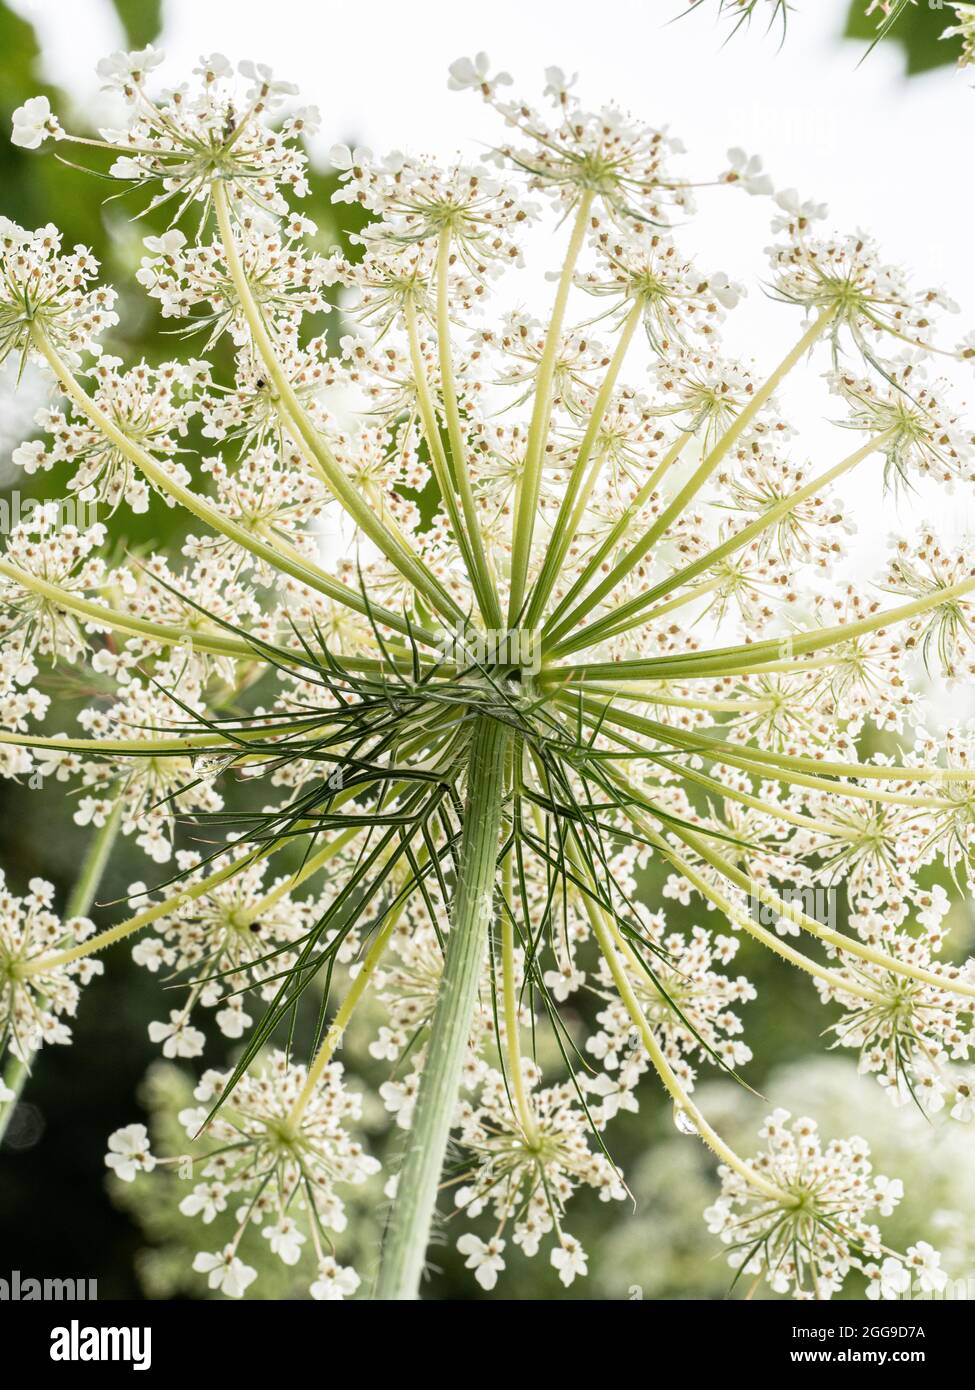 A close up of the underside of a wild carrot flower against the light showing the delicate lace like pattern of the florets Stock Photo